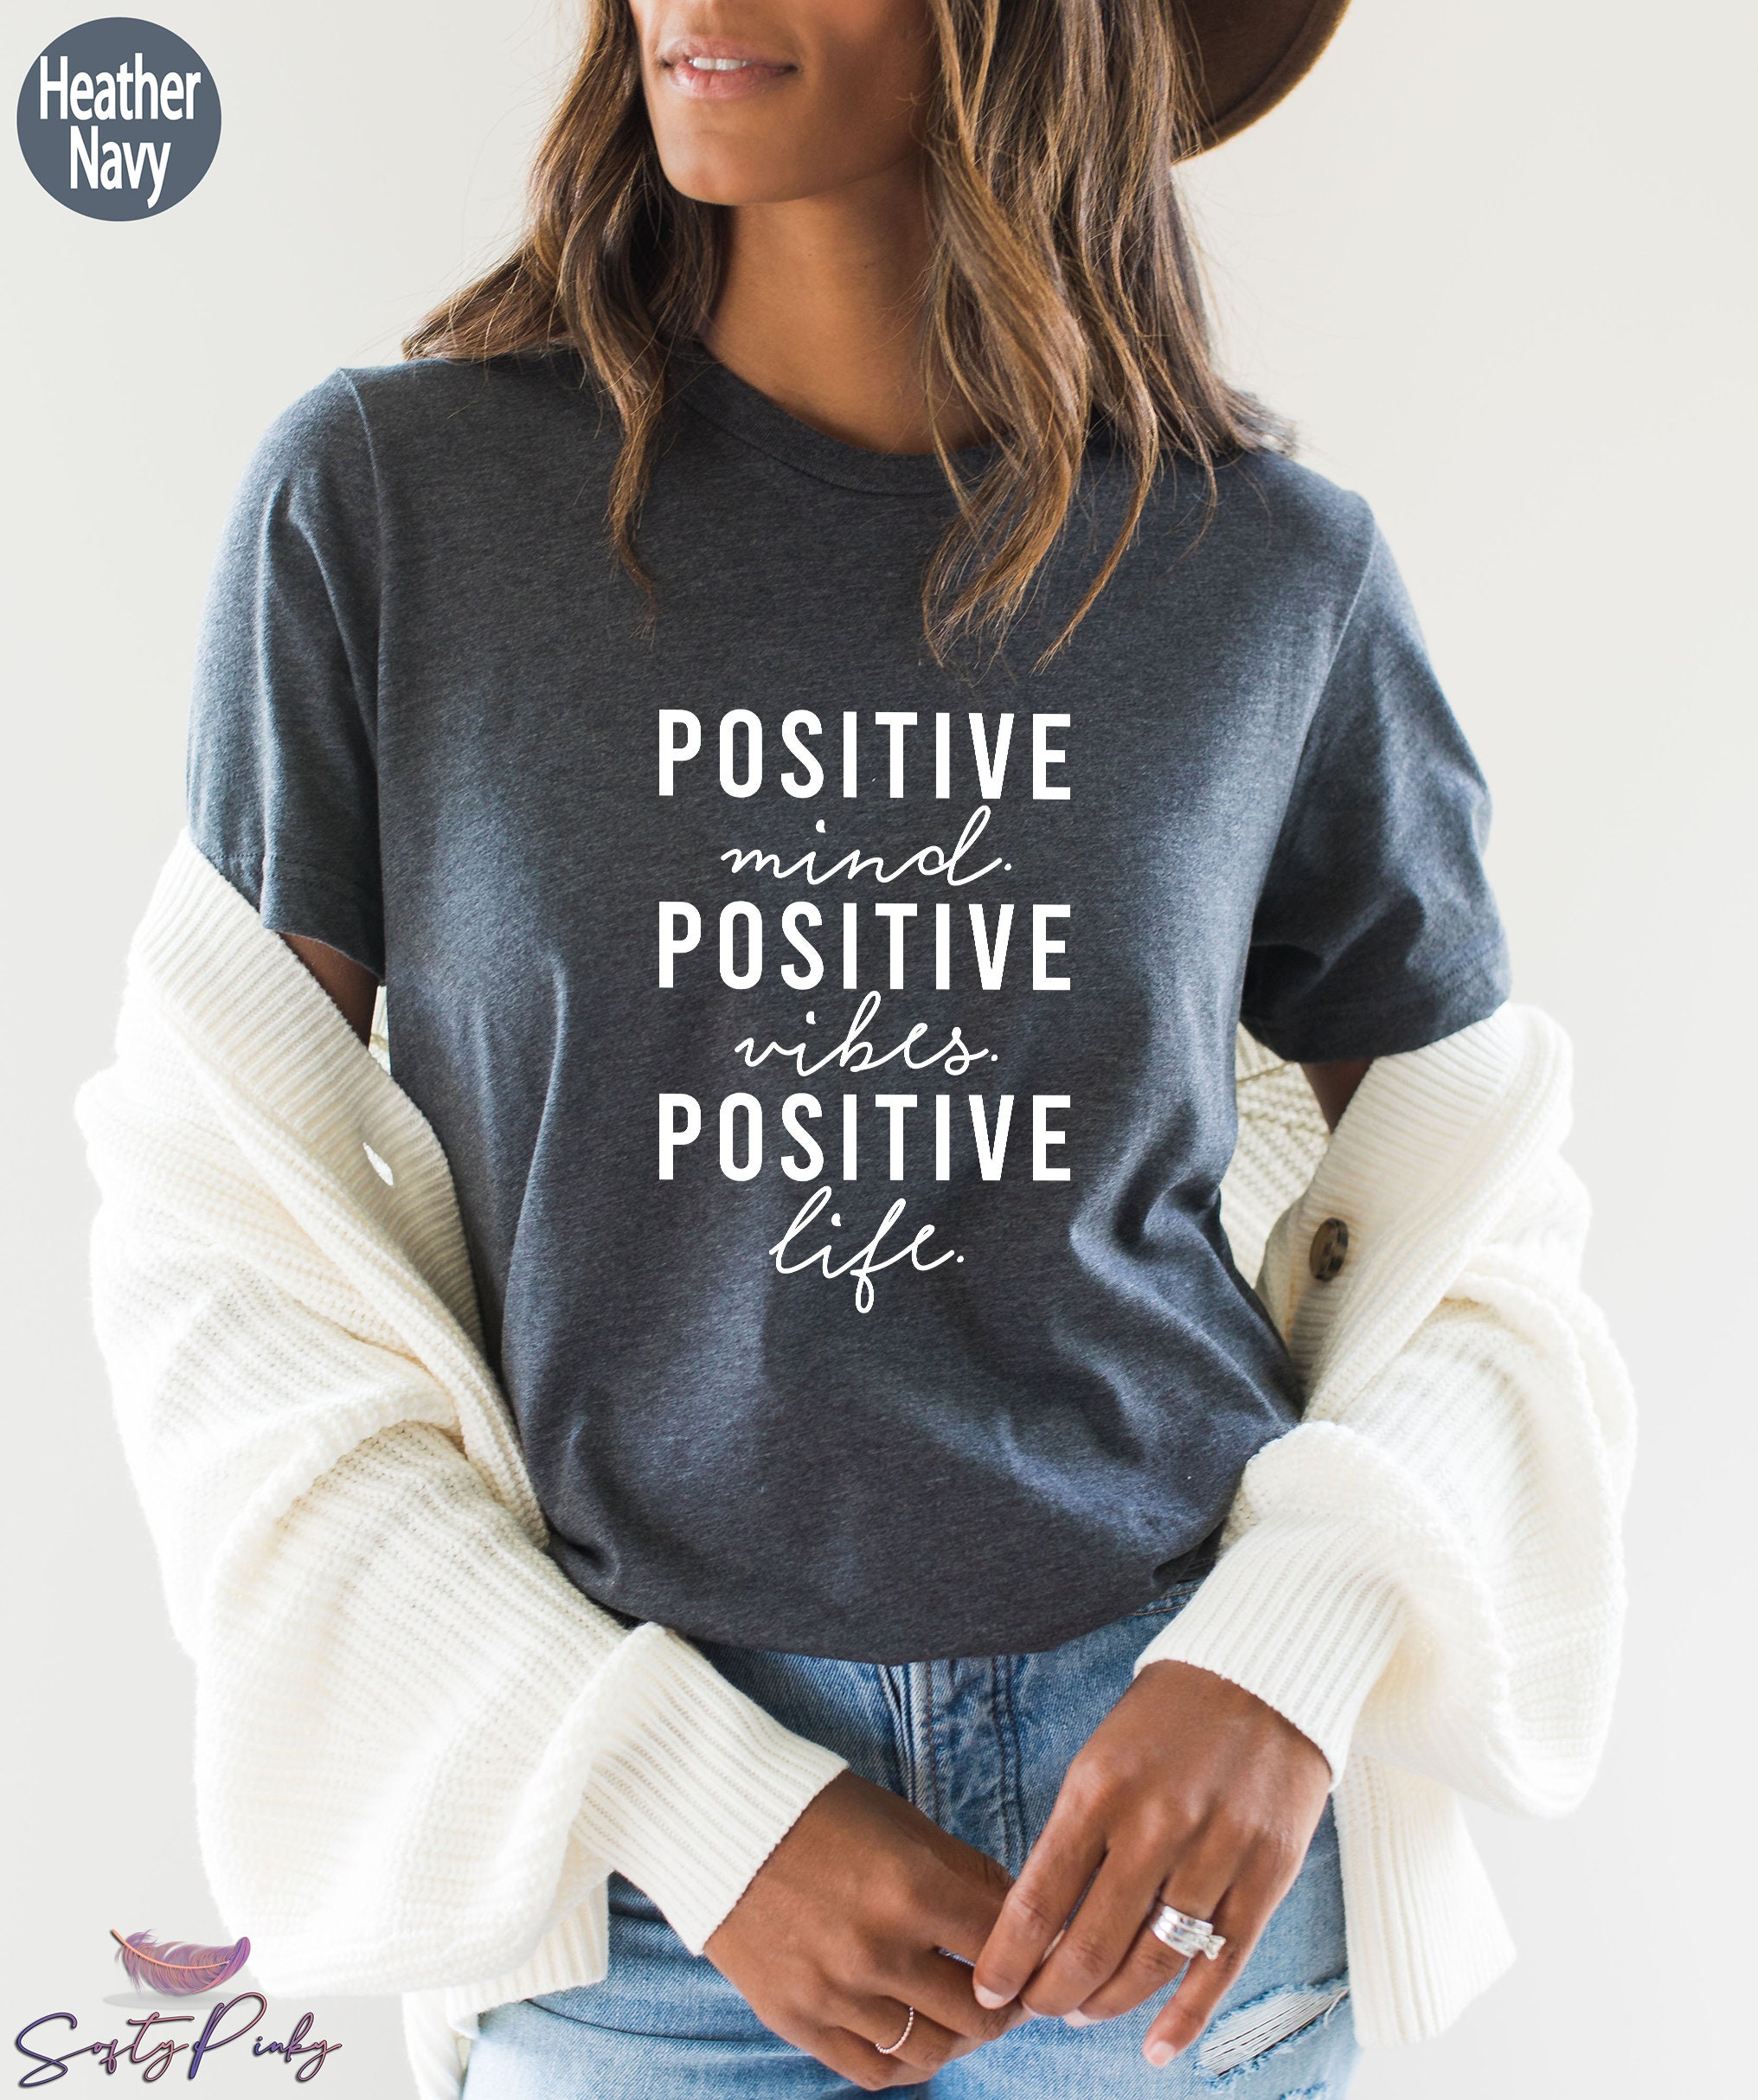 Discover Positive Mind Positive Vibes Positive Life Sweatshirt,Positive Inspirational Quotes Shirt,Positive Saying Hoodie,Positive Vibes Tee,GA5787